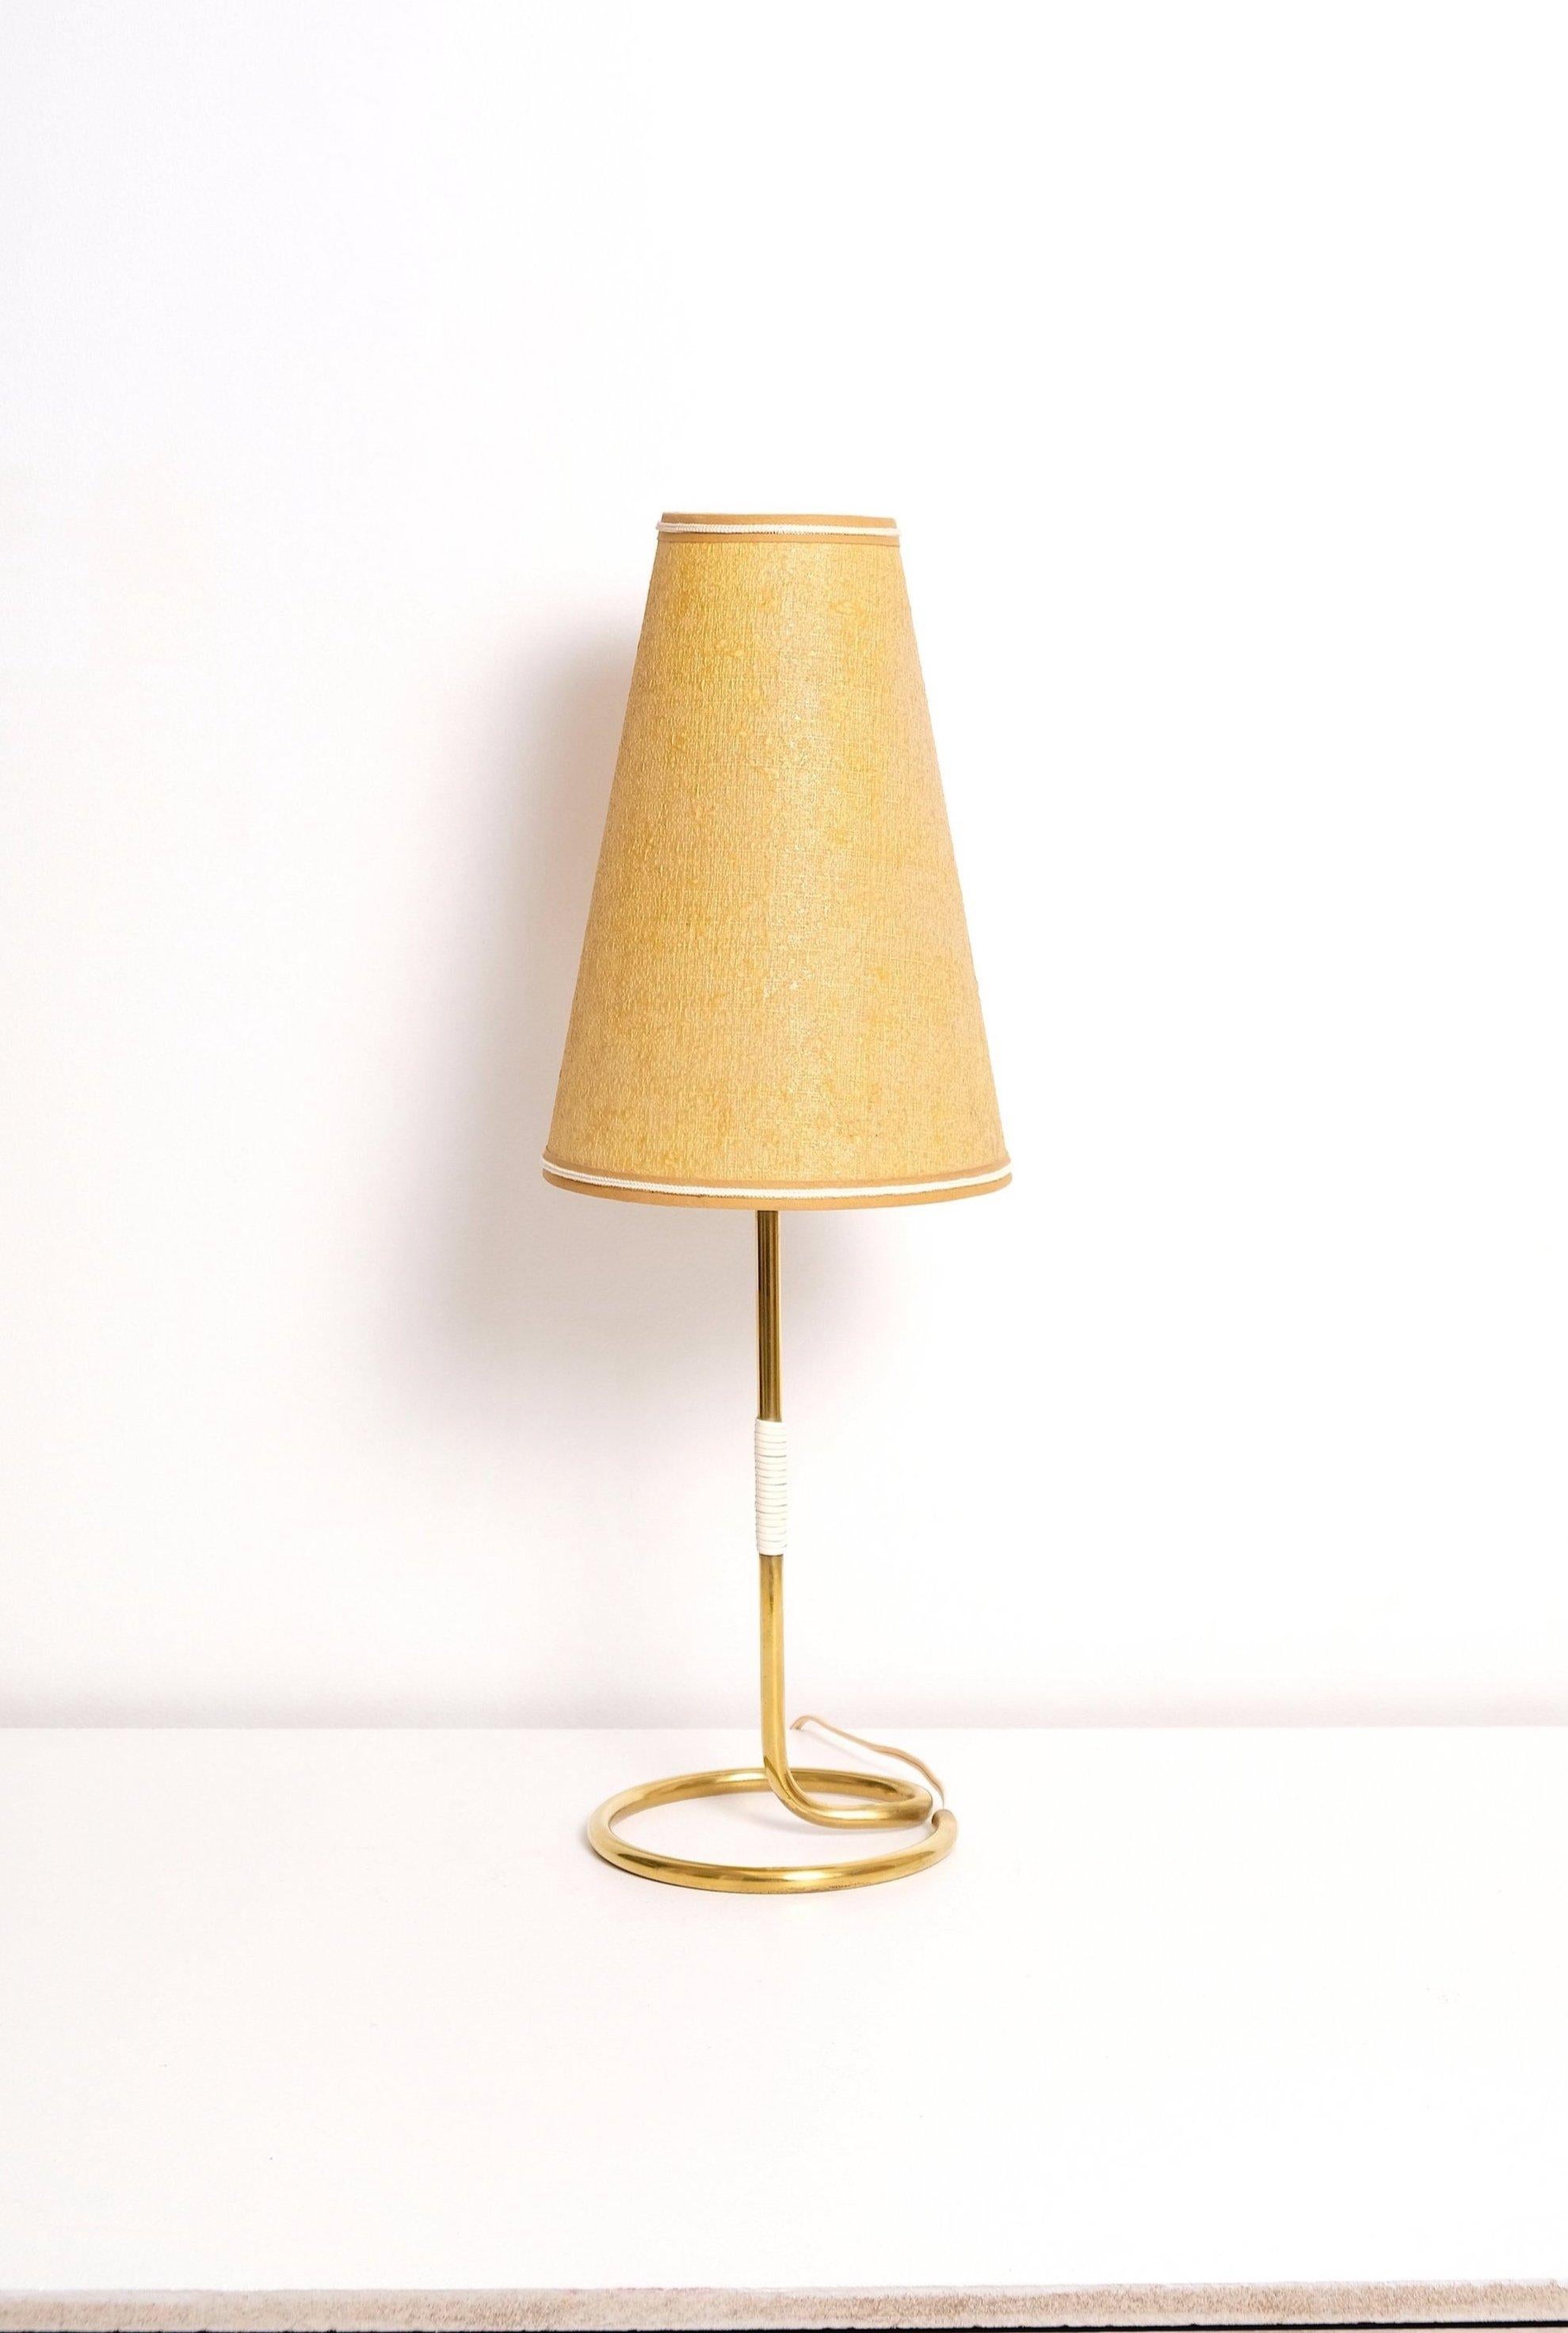 Table lamp made in German. Polished brass stem and foot, paper backed cloth shade. 40-60 watts E-26 Edison medium base incandescent bulb recommended or higher if LED/CFL.
Rewired with new E-26 medium base socket and rewired with 18/2 plastic cord,